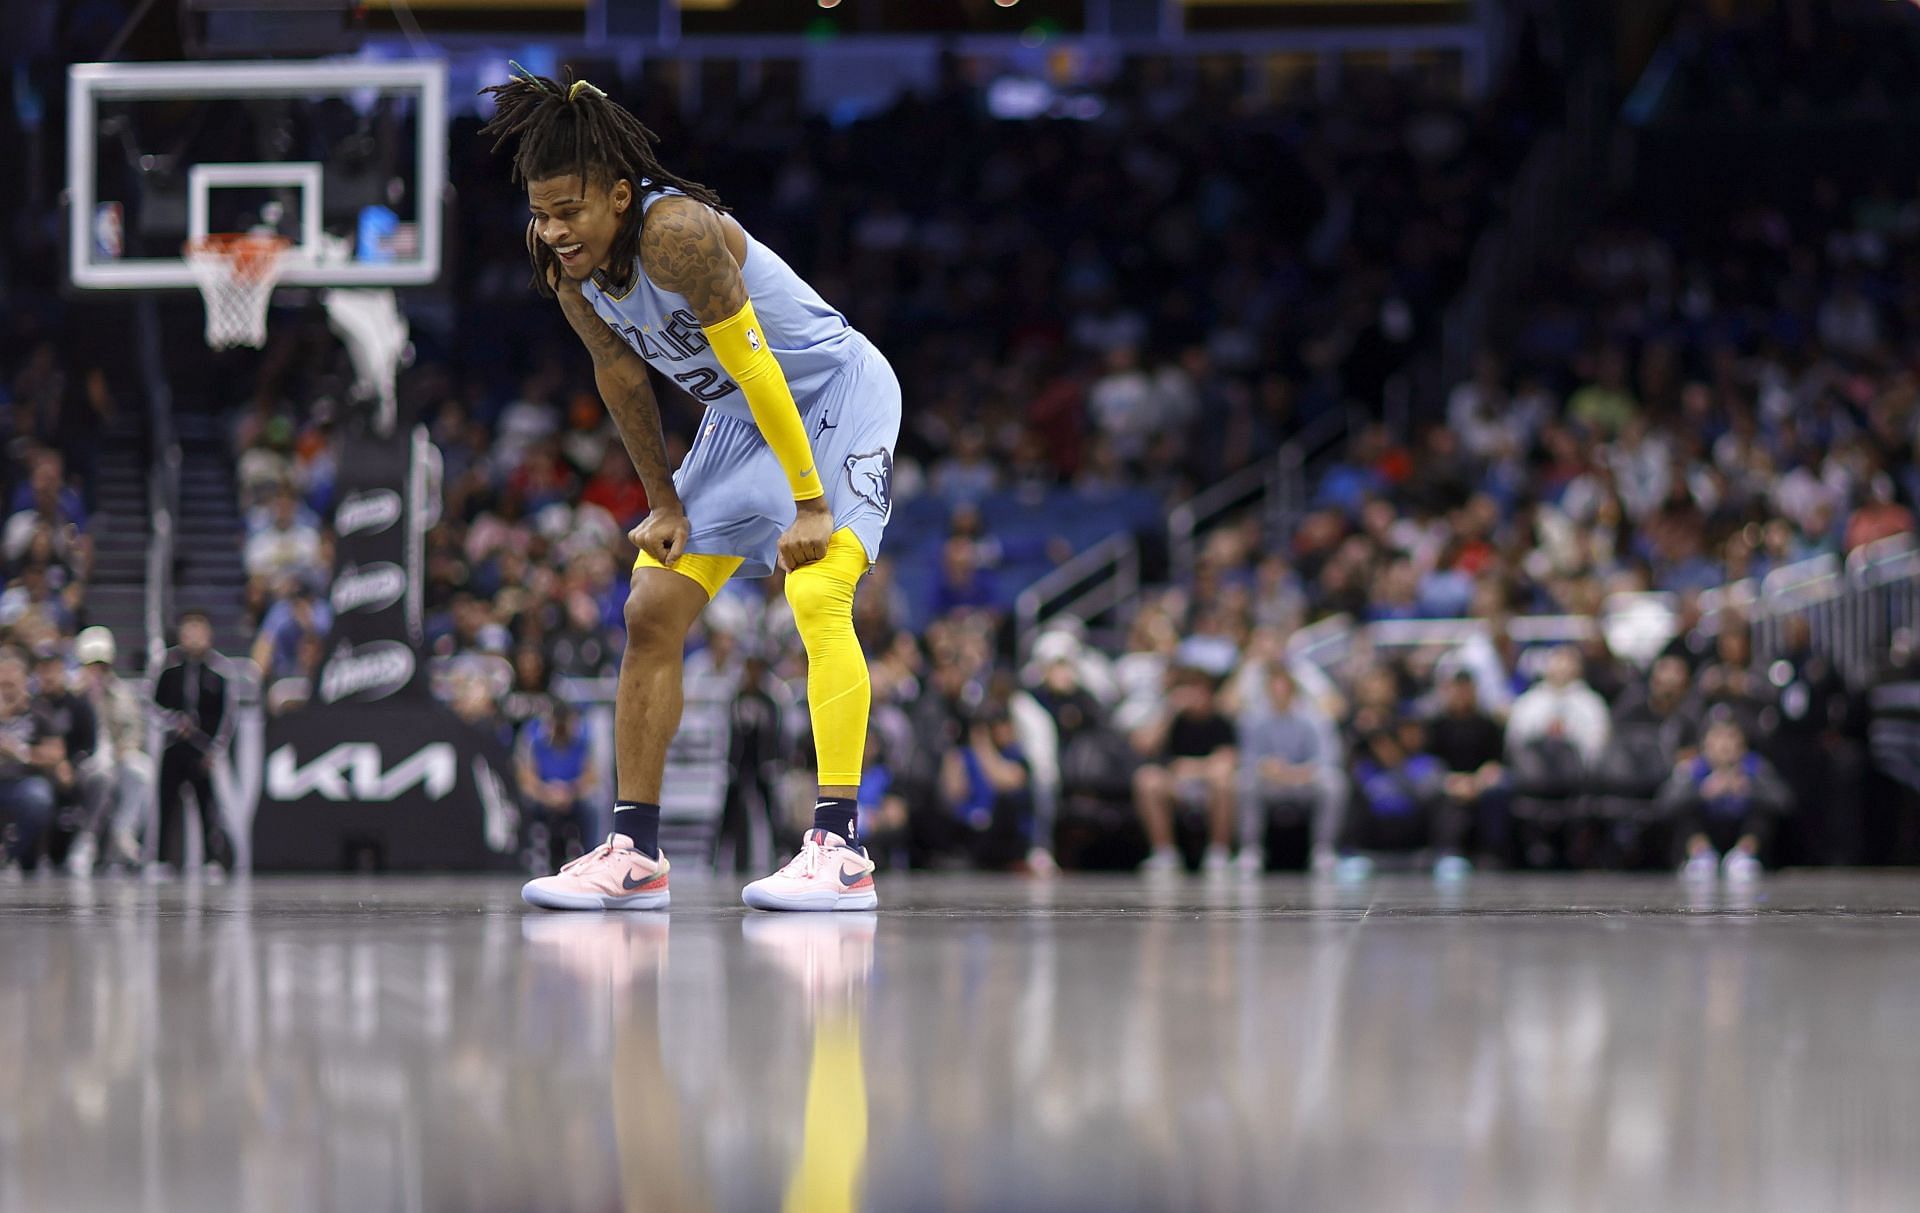 Memphis Grizzlies star point guard Ja Morant has received a suspension from the NBA